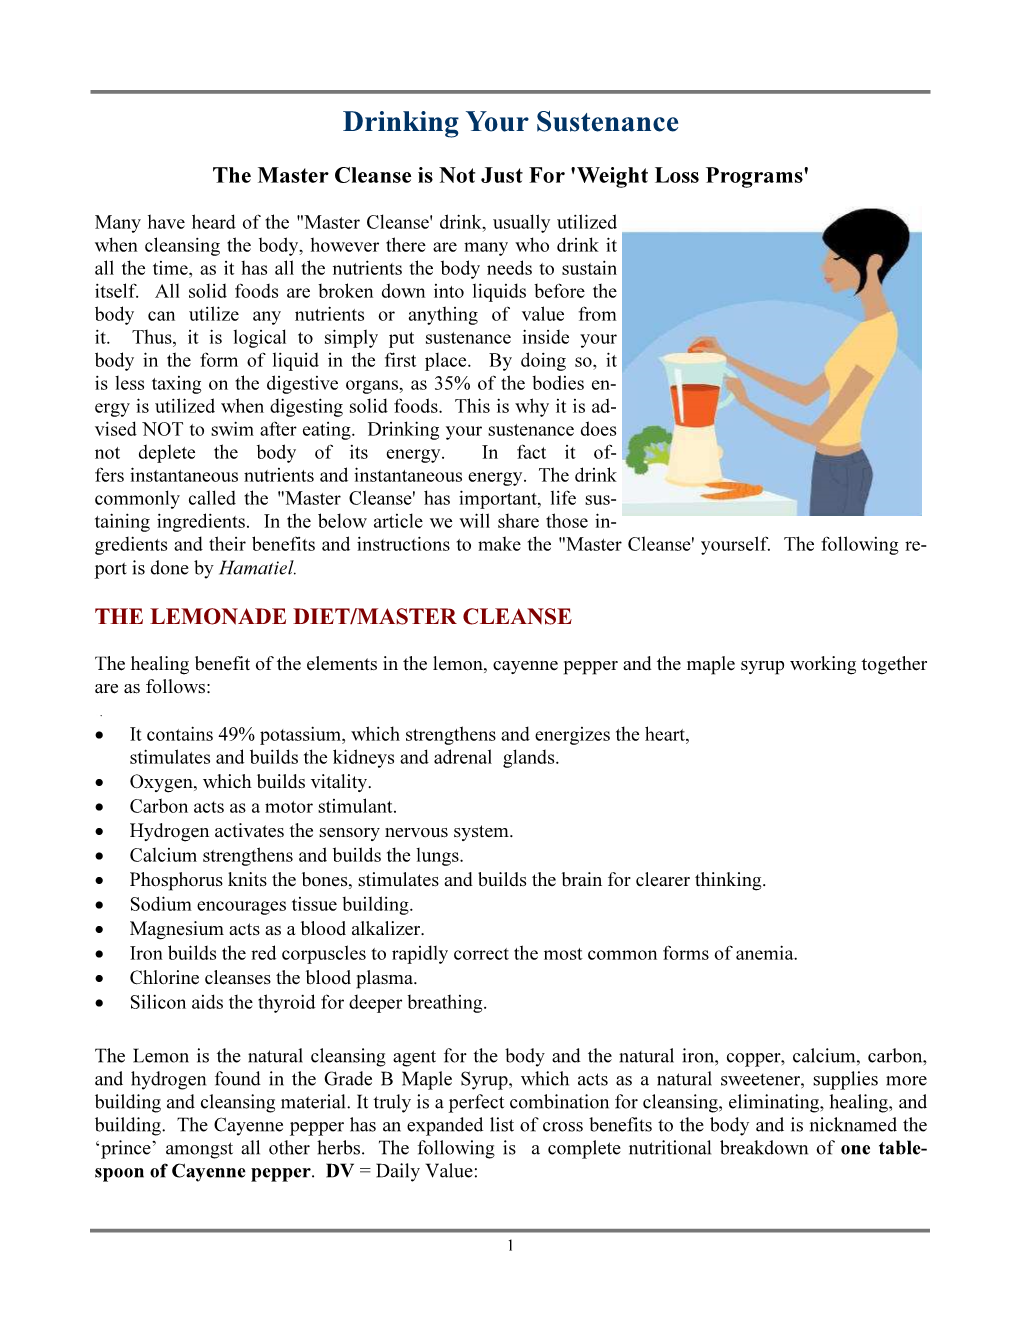 About the Master Cleanse